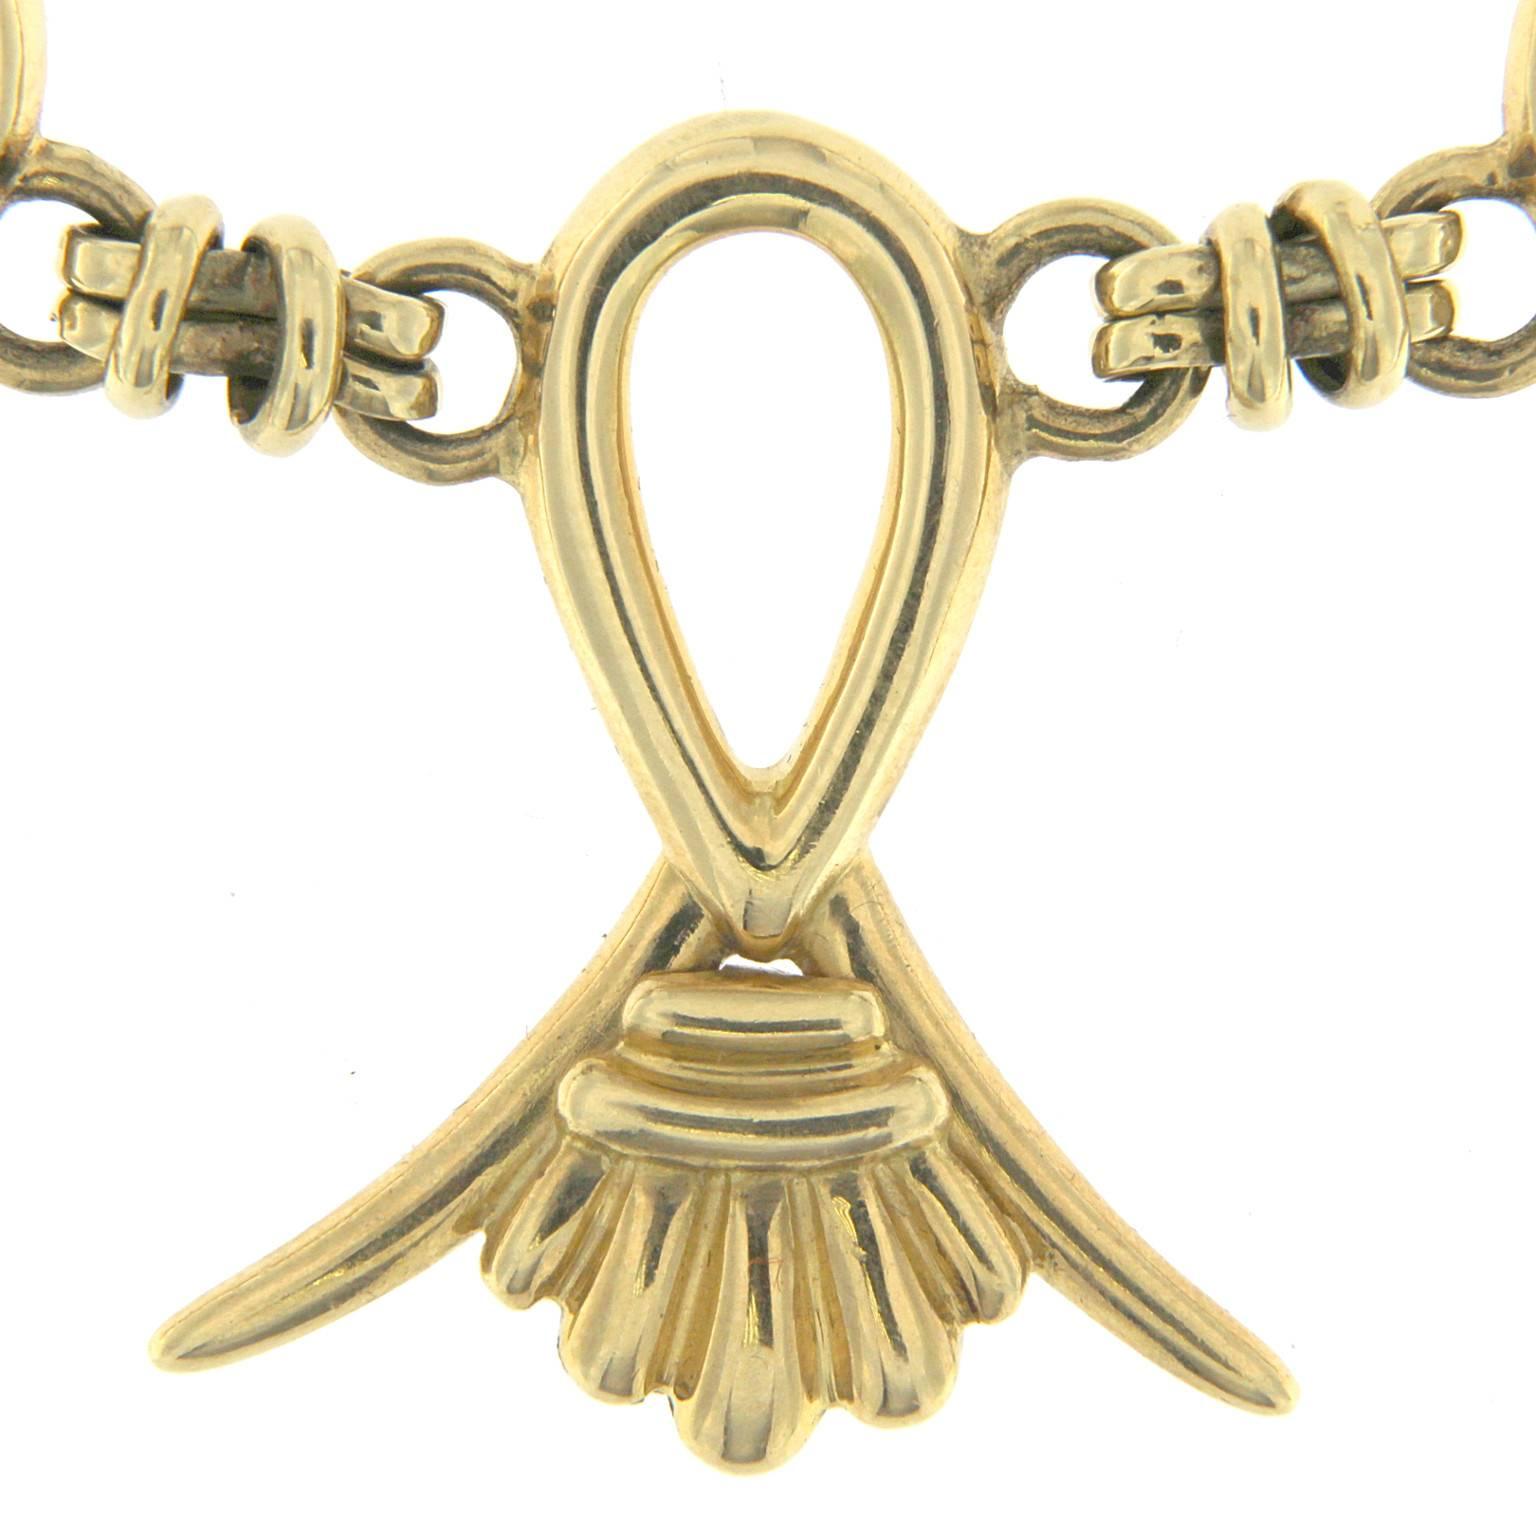 Very sought after these elements that one after the other make up this beautiful necklace, all in 18 kt gold. Easy to wear at all ages thanks to the spring ring closure.
The total weight of the gold is GR 80.10
Stamp 750 10 MI 